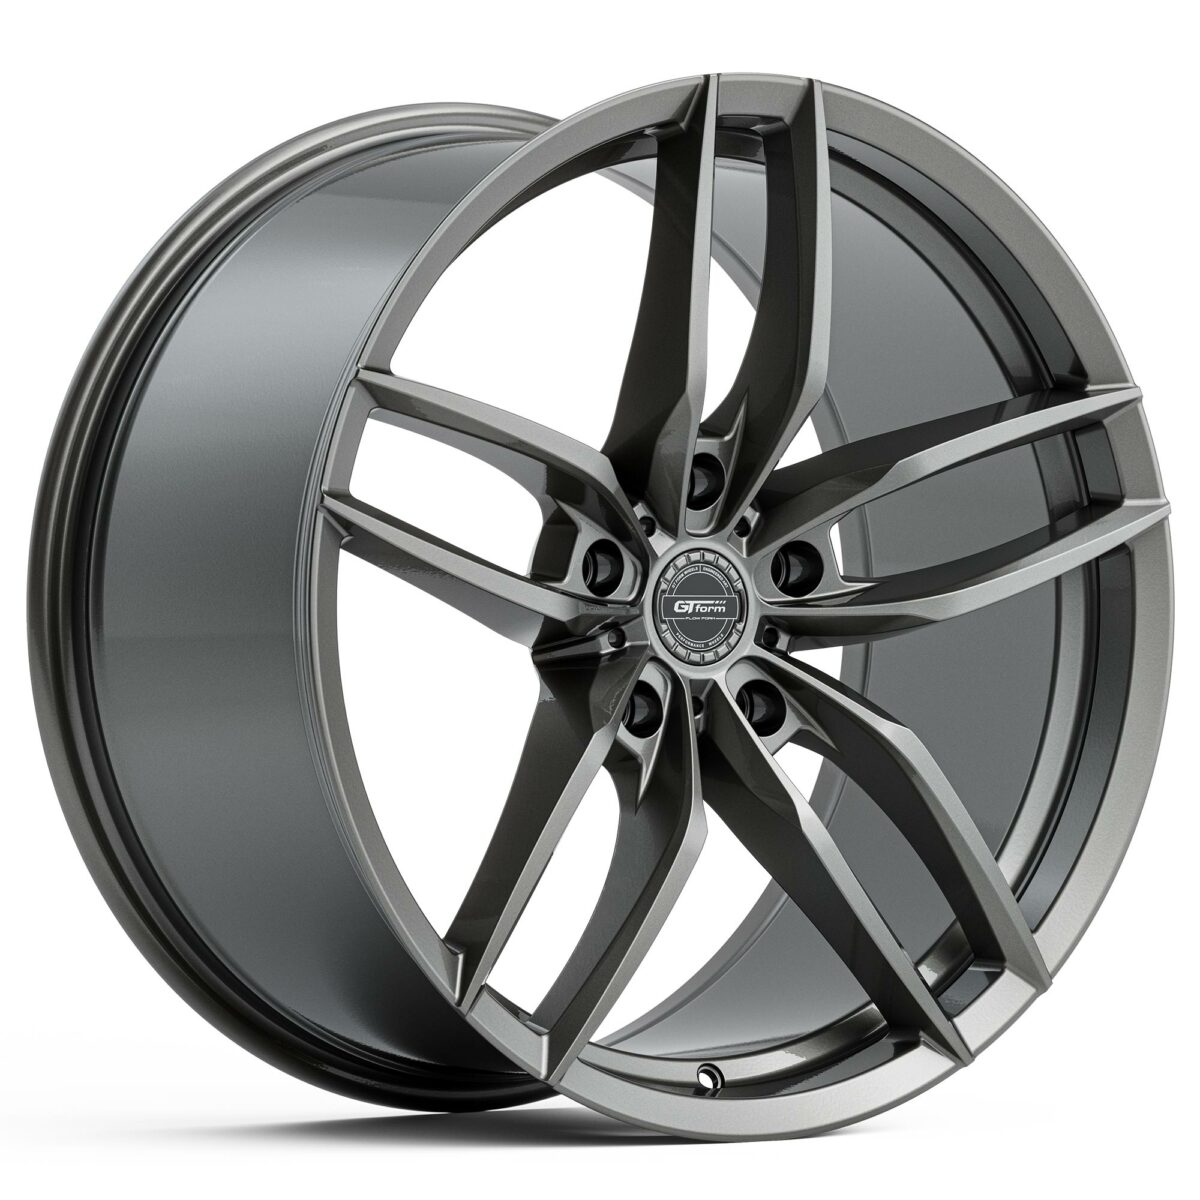 GT Form Sadow Gloss Gunmetal Staggered Rims 19 20 inch Performance Wheels